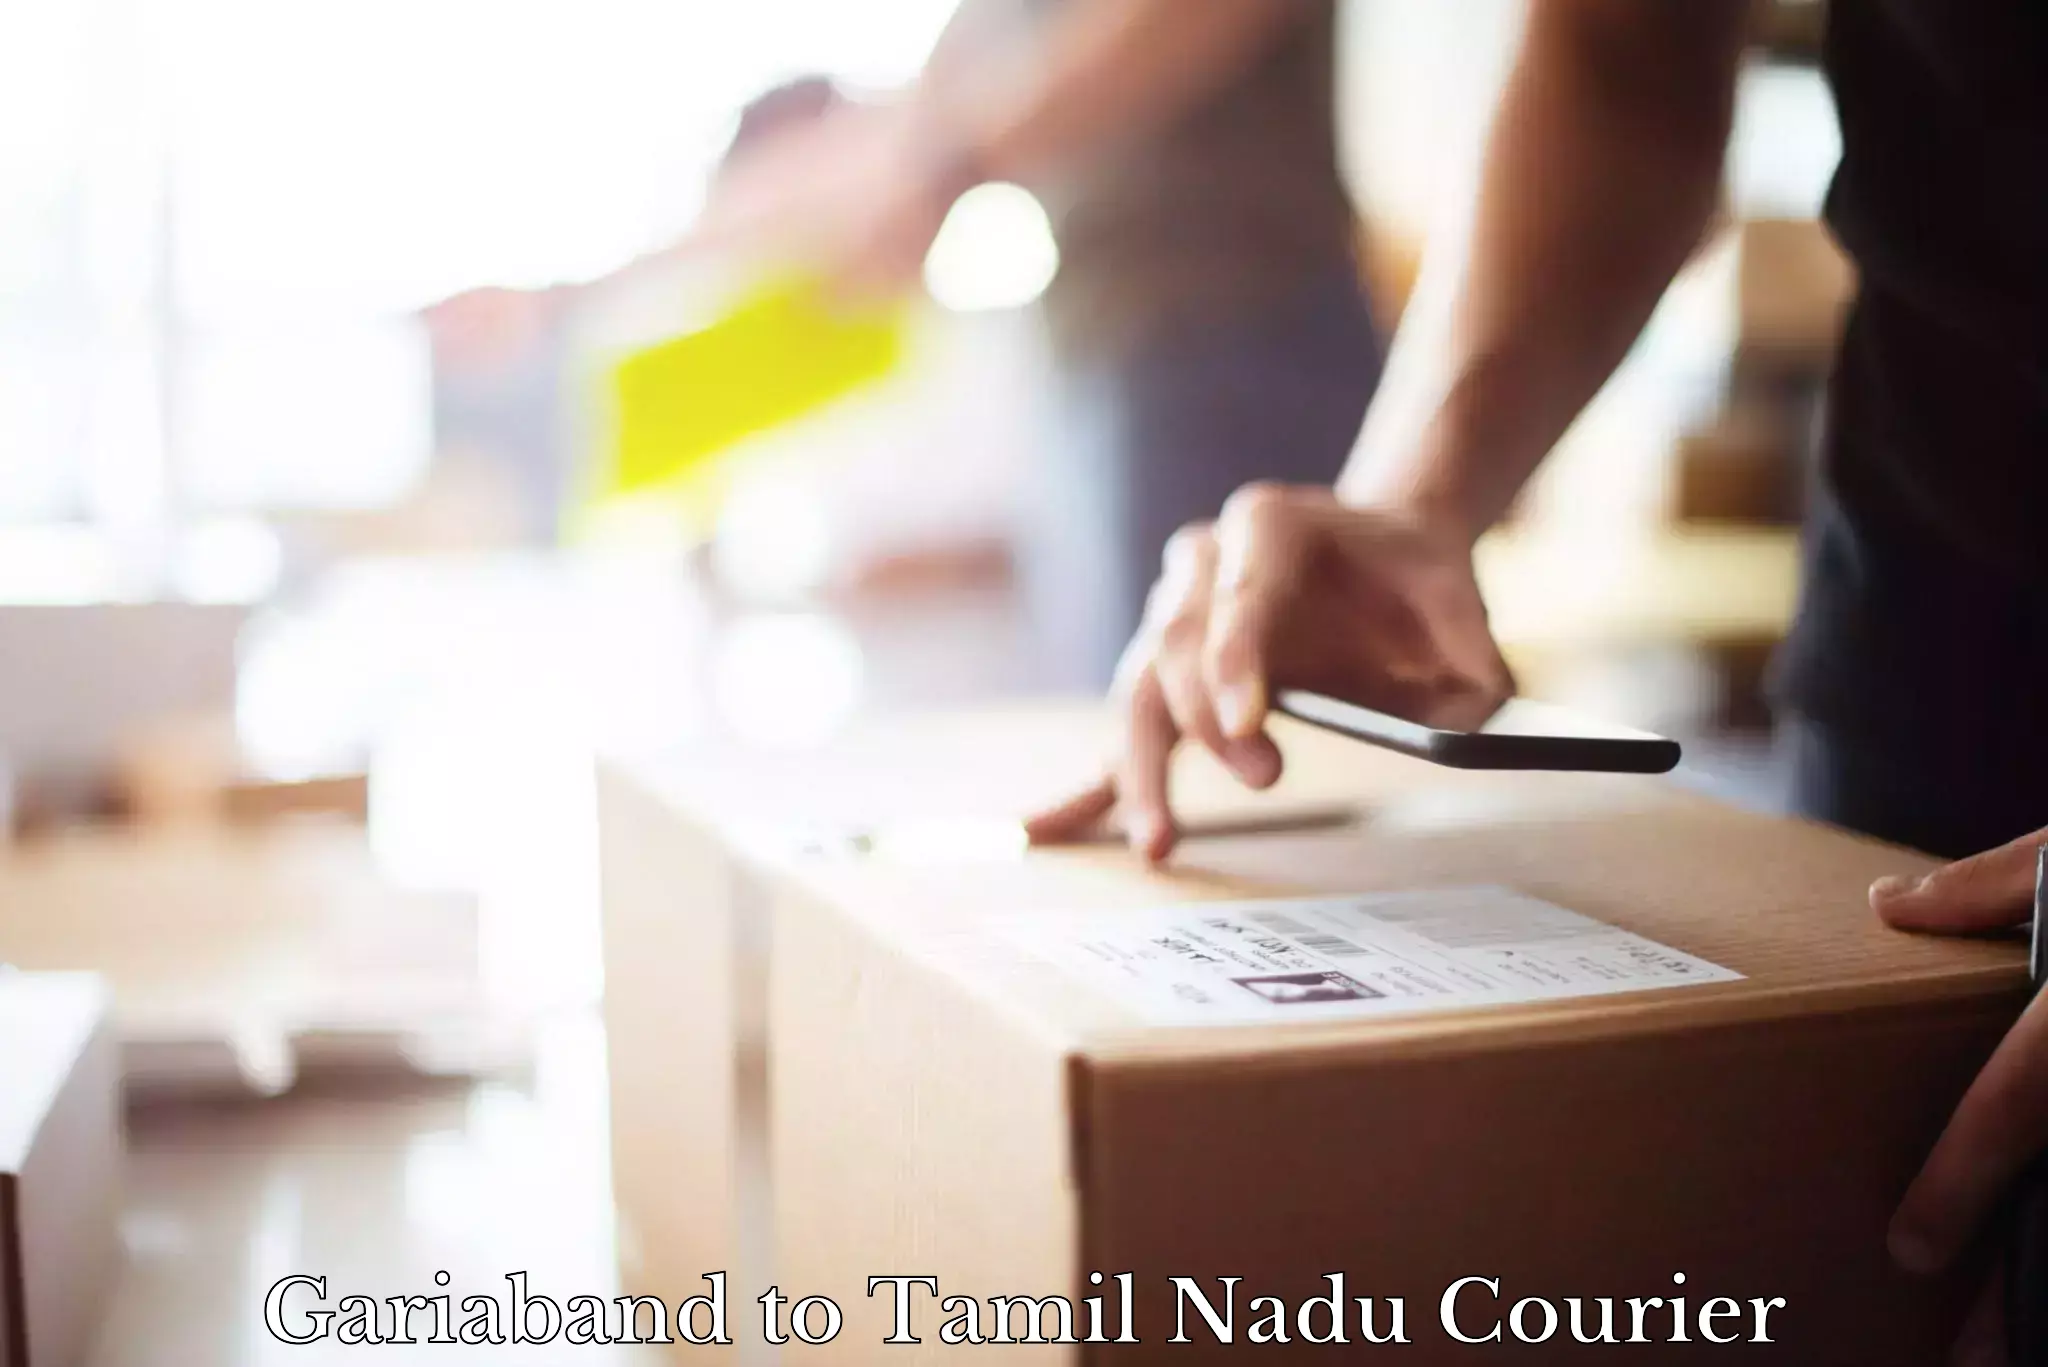 High-priority parcel service Gariaband to Tamil Nadu